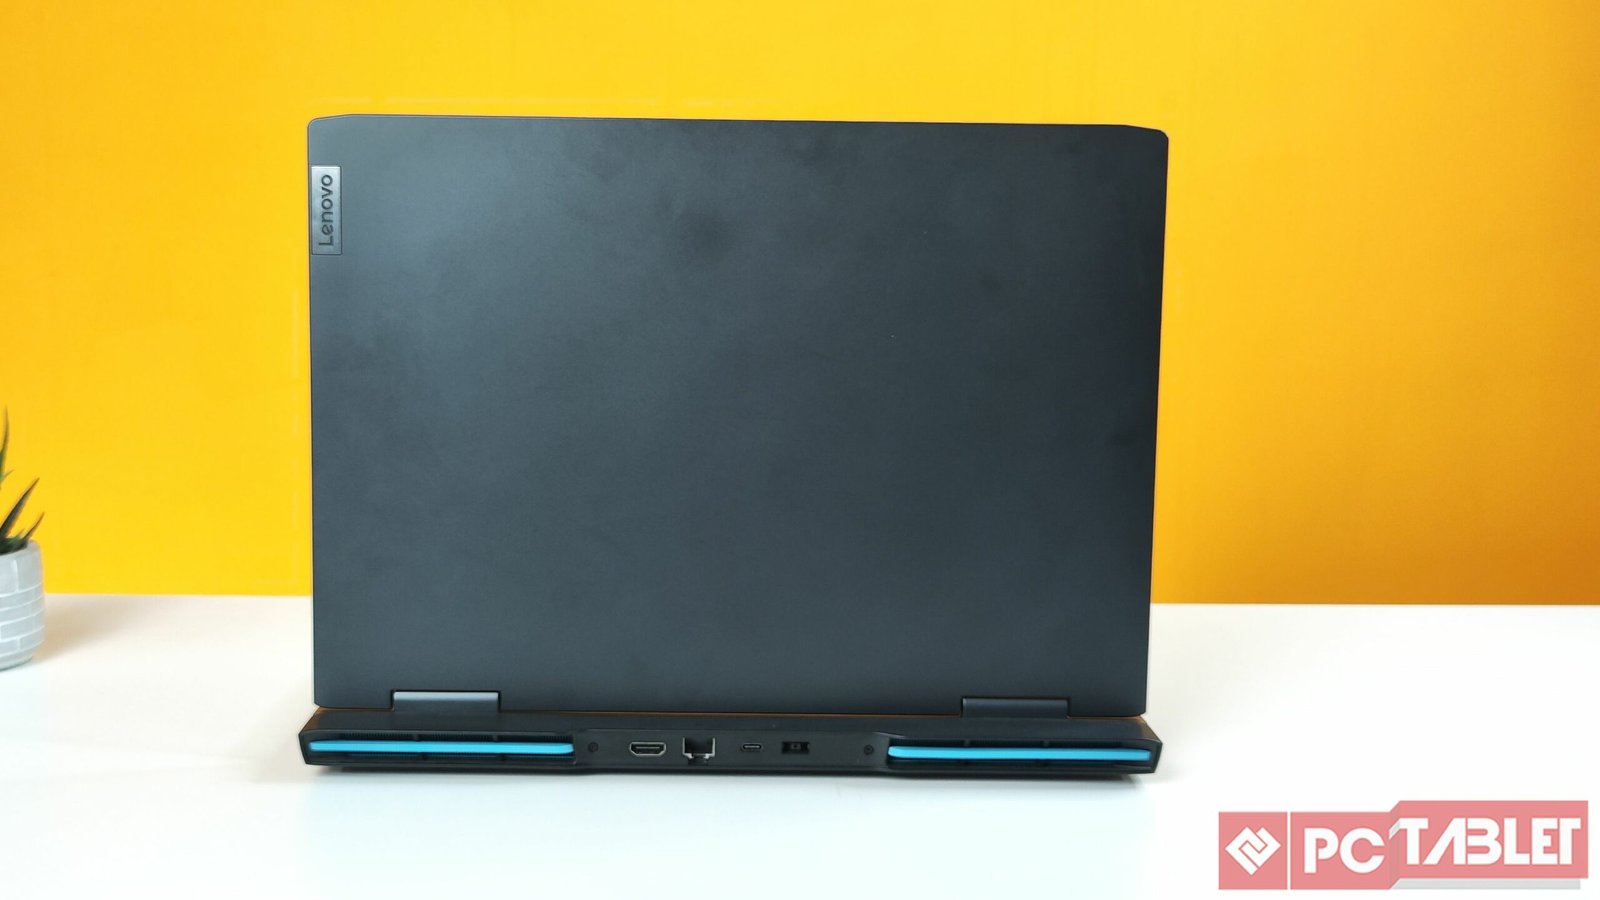 Lenovo IdeaPad Gaming 3 review: almost a good $1,000 gaming laptop